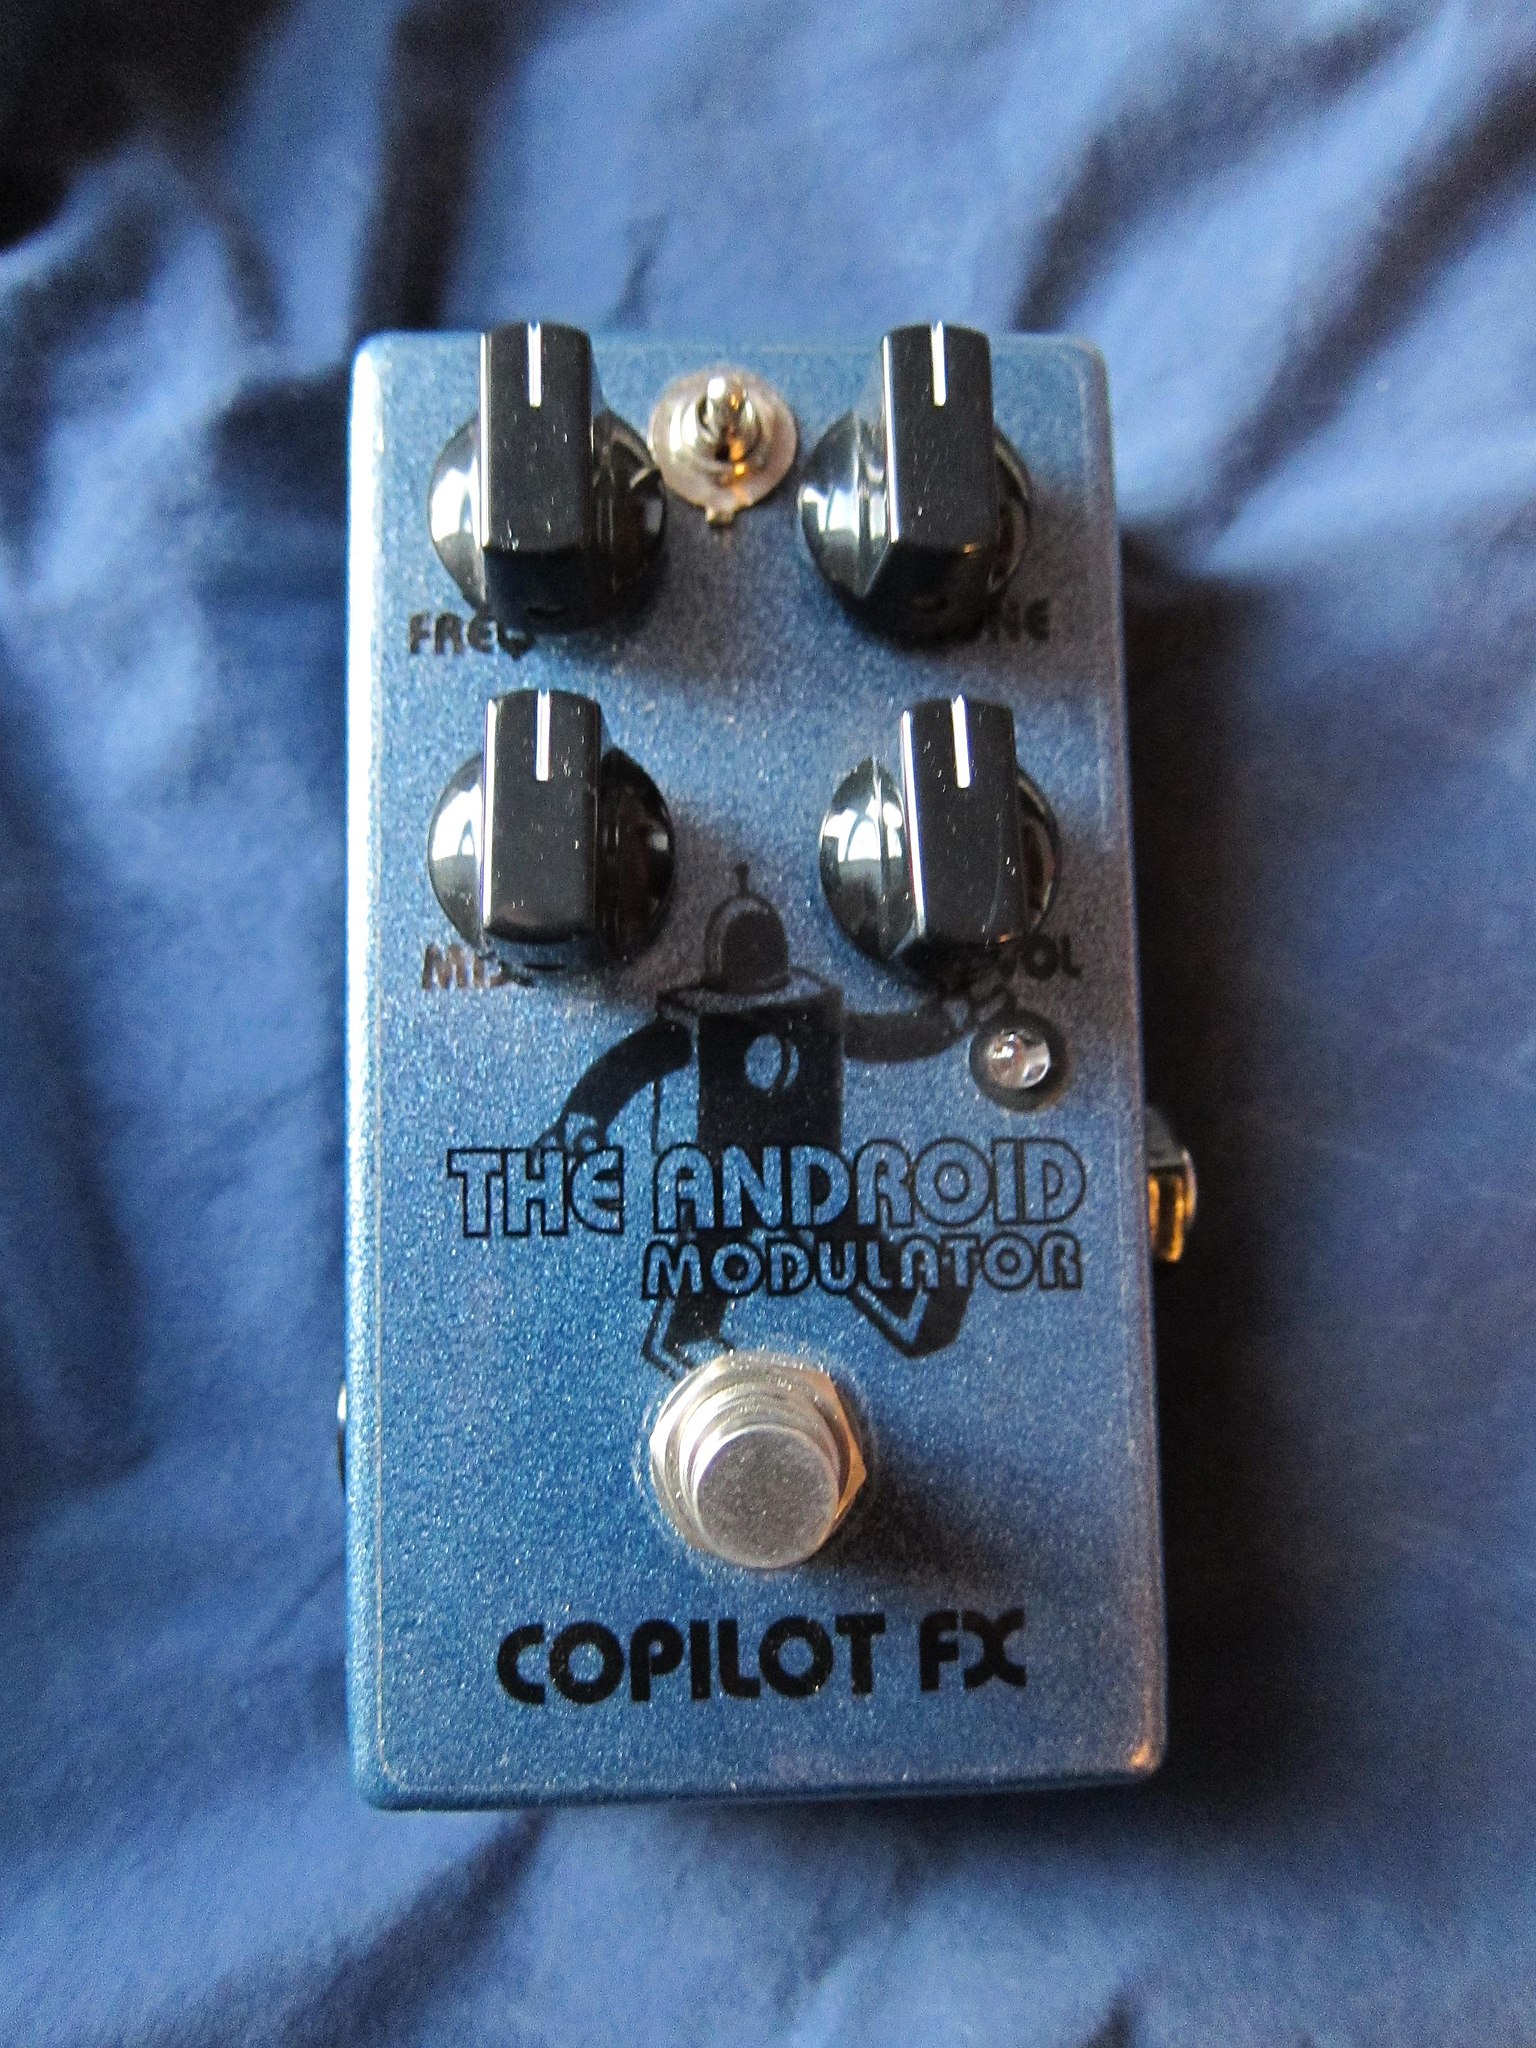 File:Copilot FX the Android Ring Modulator.jpg - Wikimedia Commons